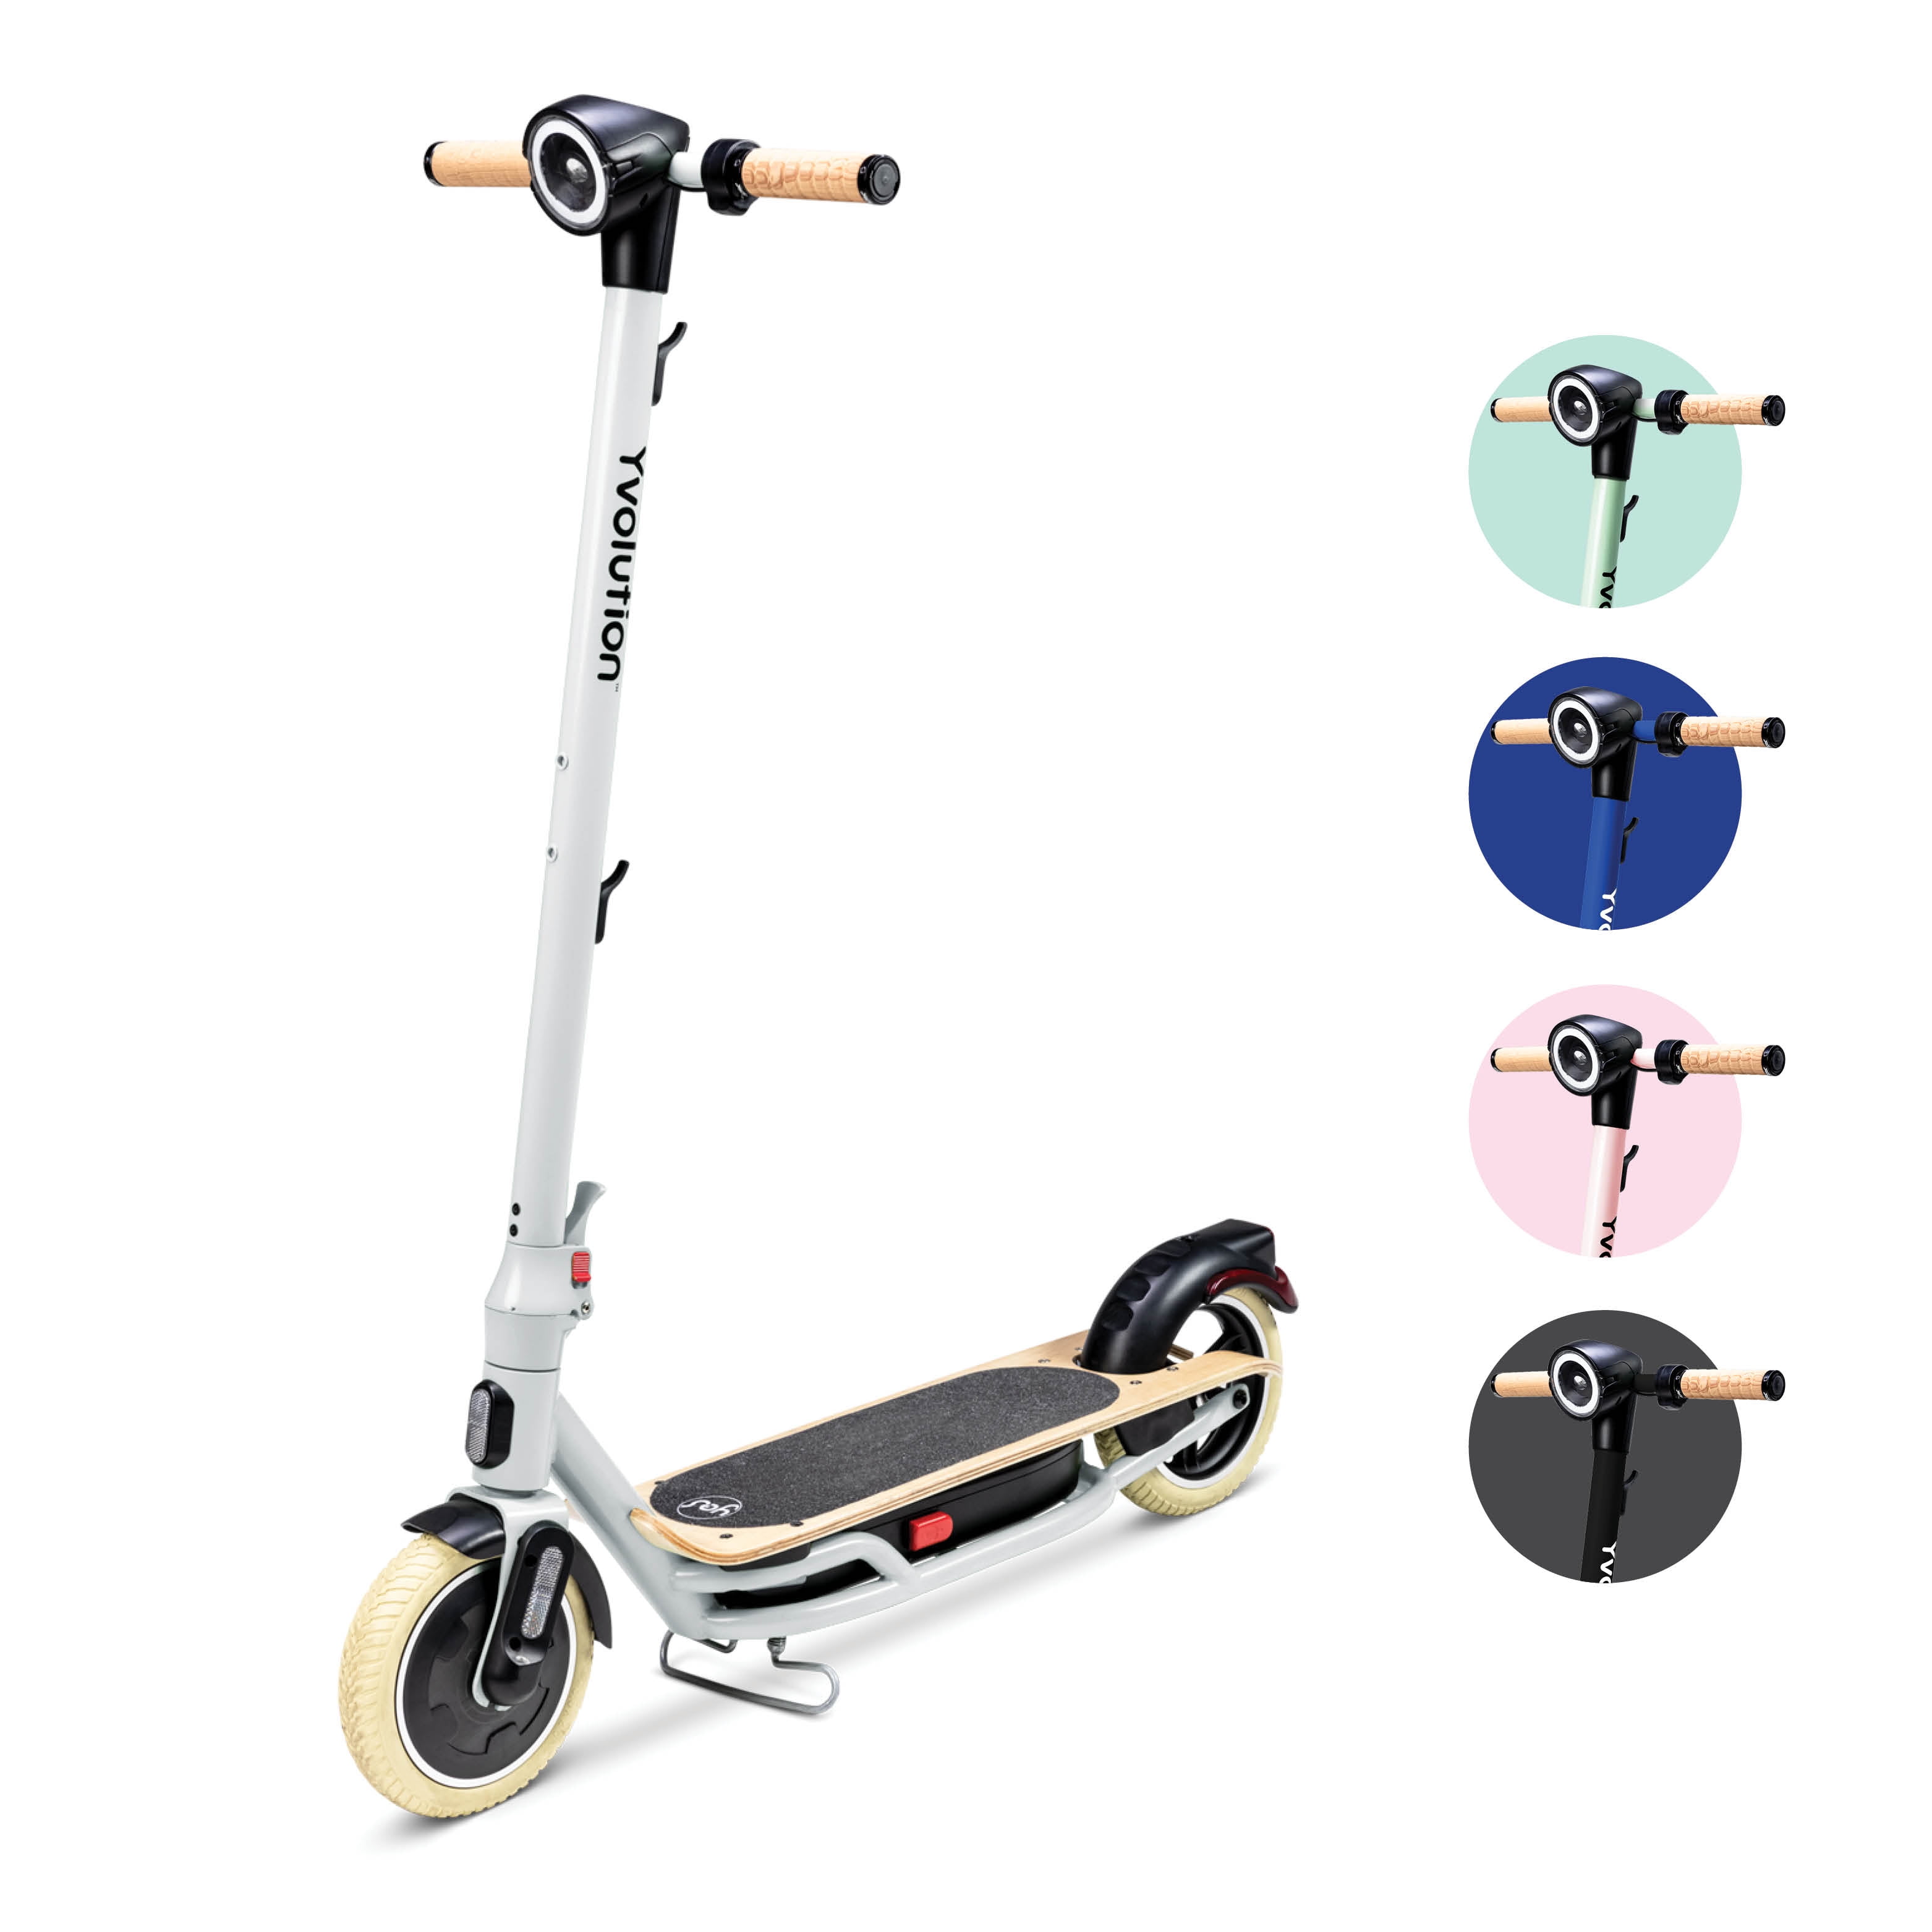 Yvolution Yes Electric Scooter for Adults (Grey) LED Display, Foldable Walmart.com